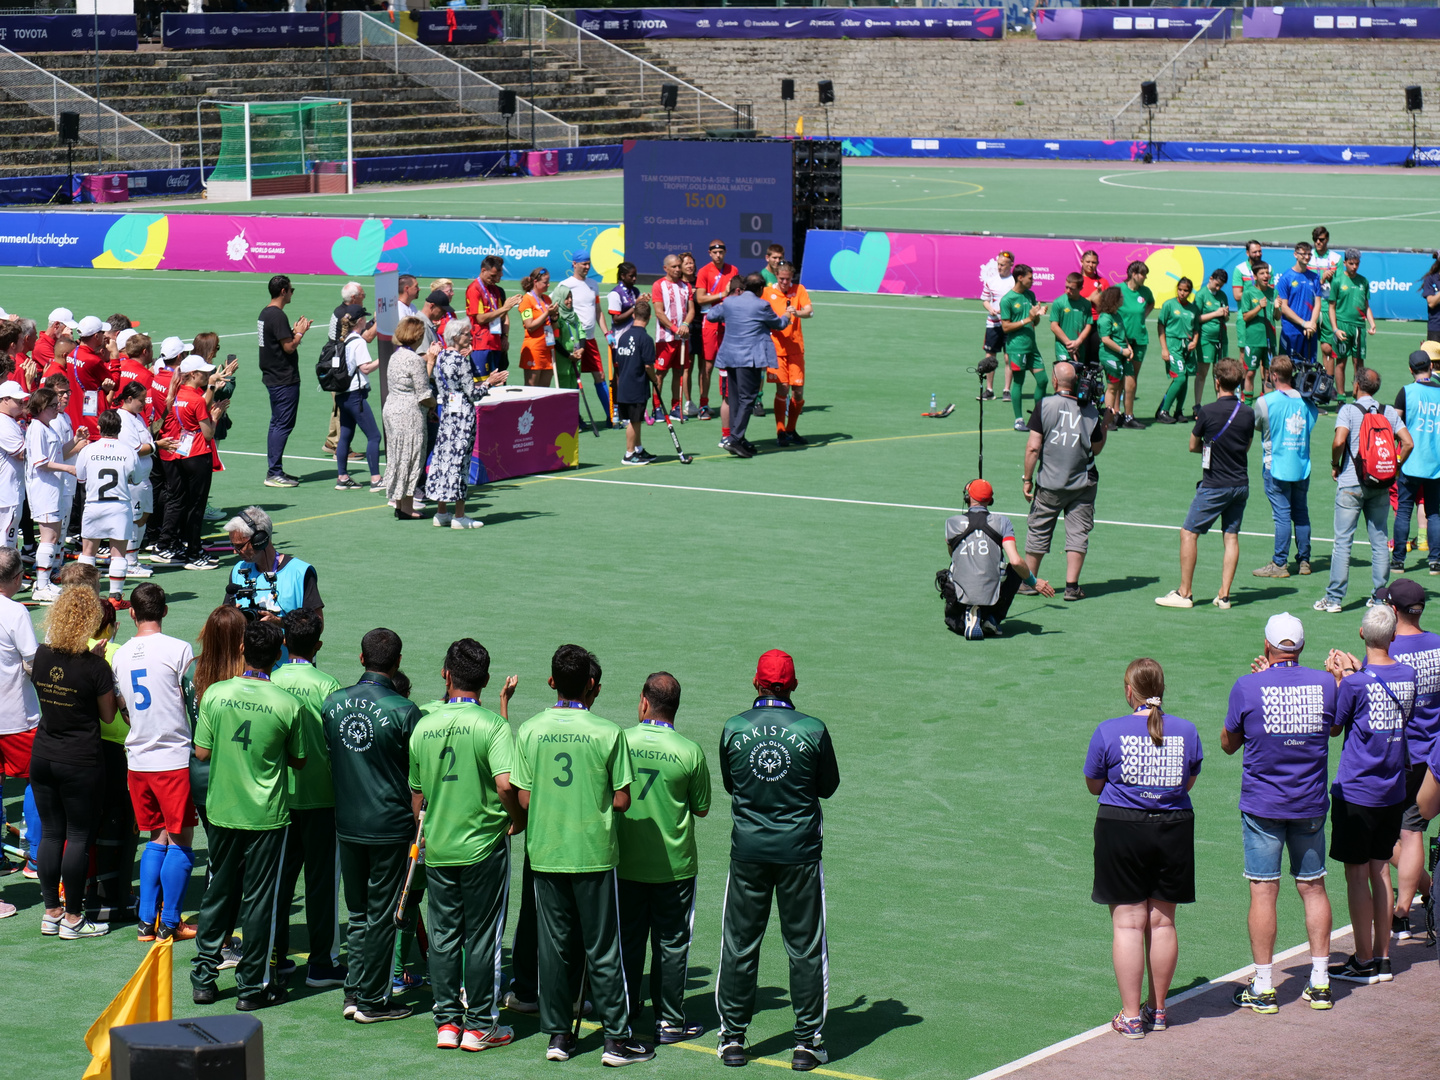           " Special Olympic Games in Berlin"